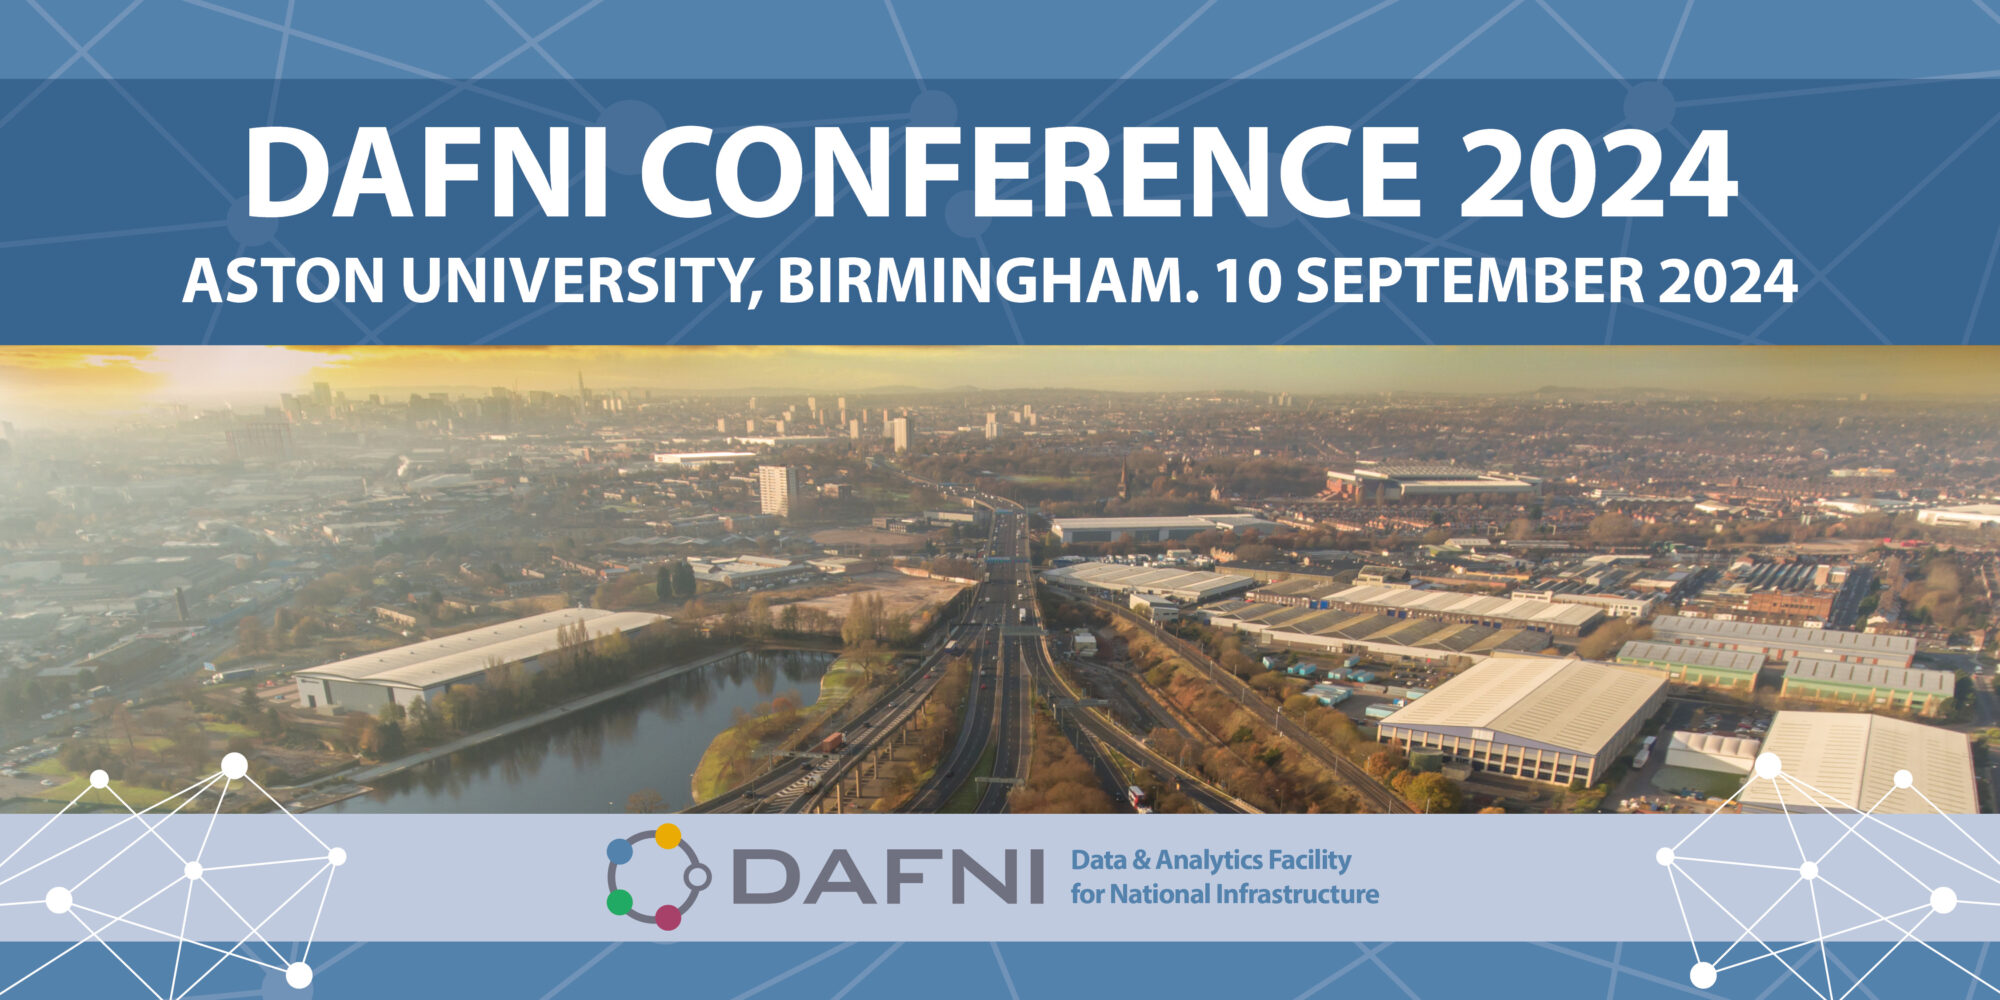 DAFNI Conference 2024 with birds eye view of Birmingham and river